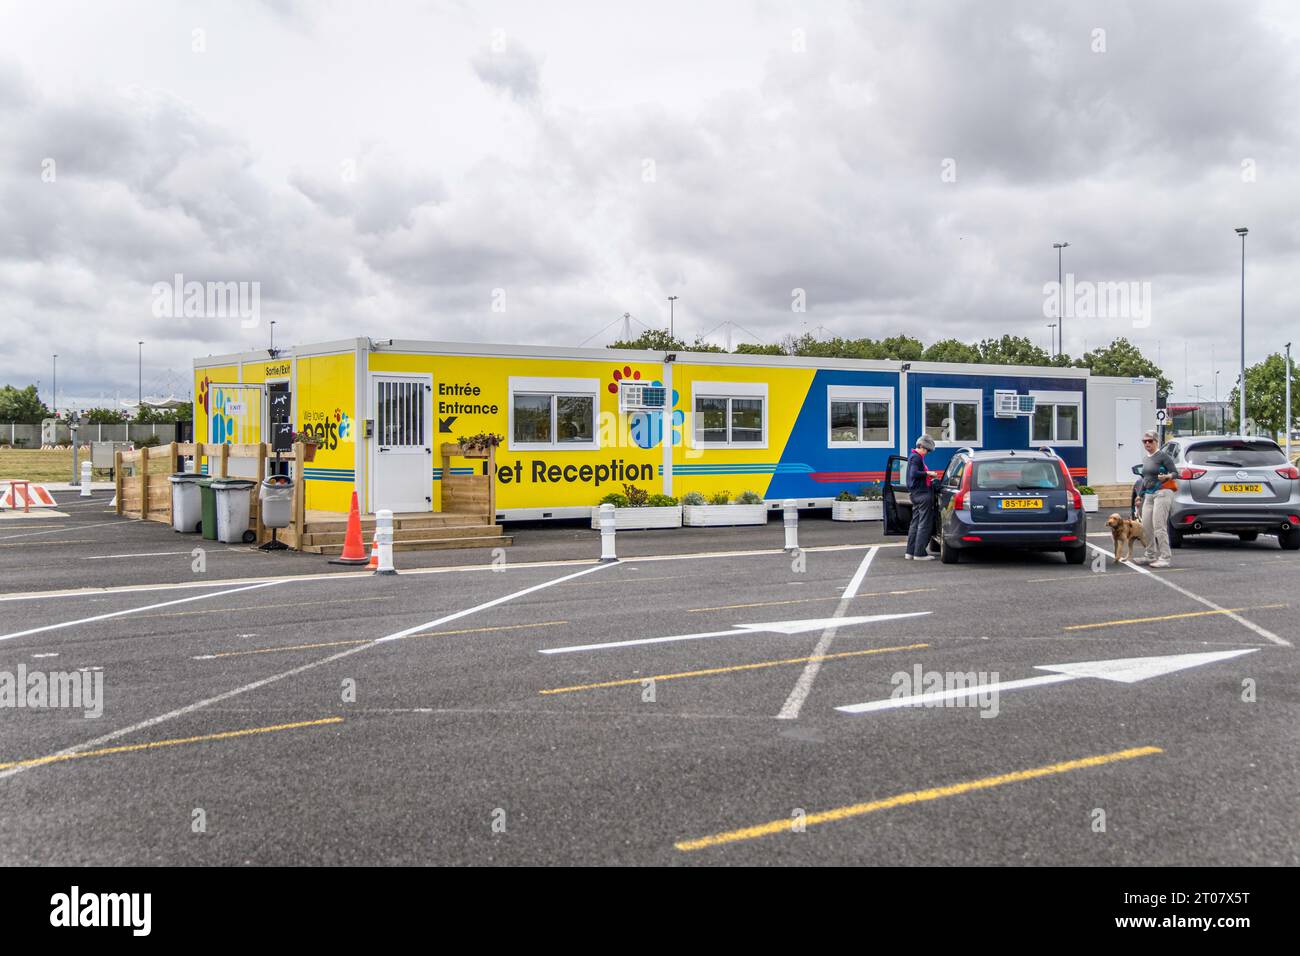 Calais, France- July 22, 2023: Eurotunnel Pet Reception building at the French Terminal Stock Photo